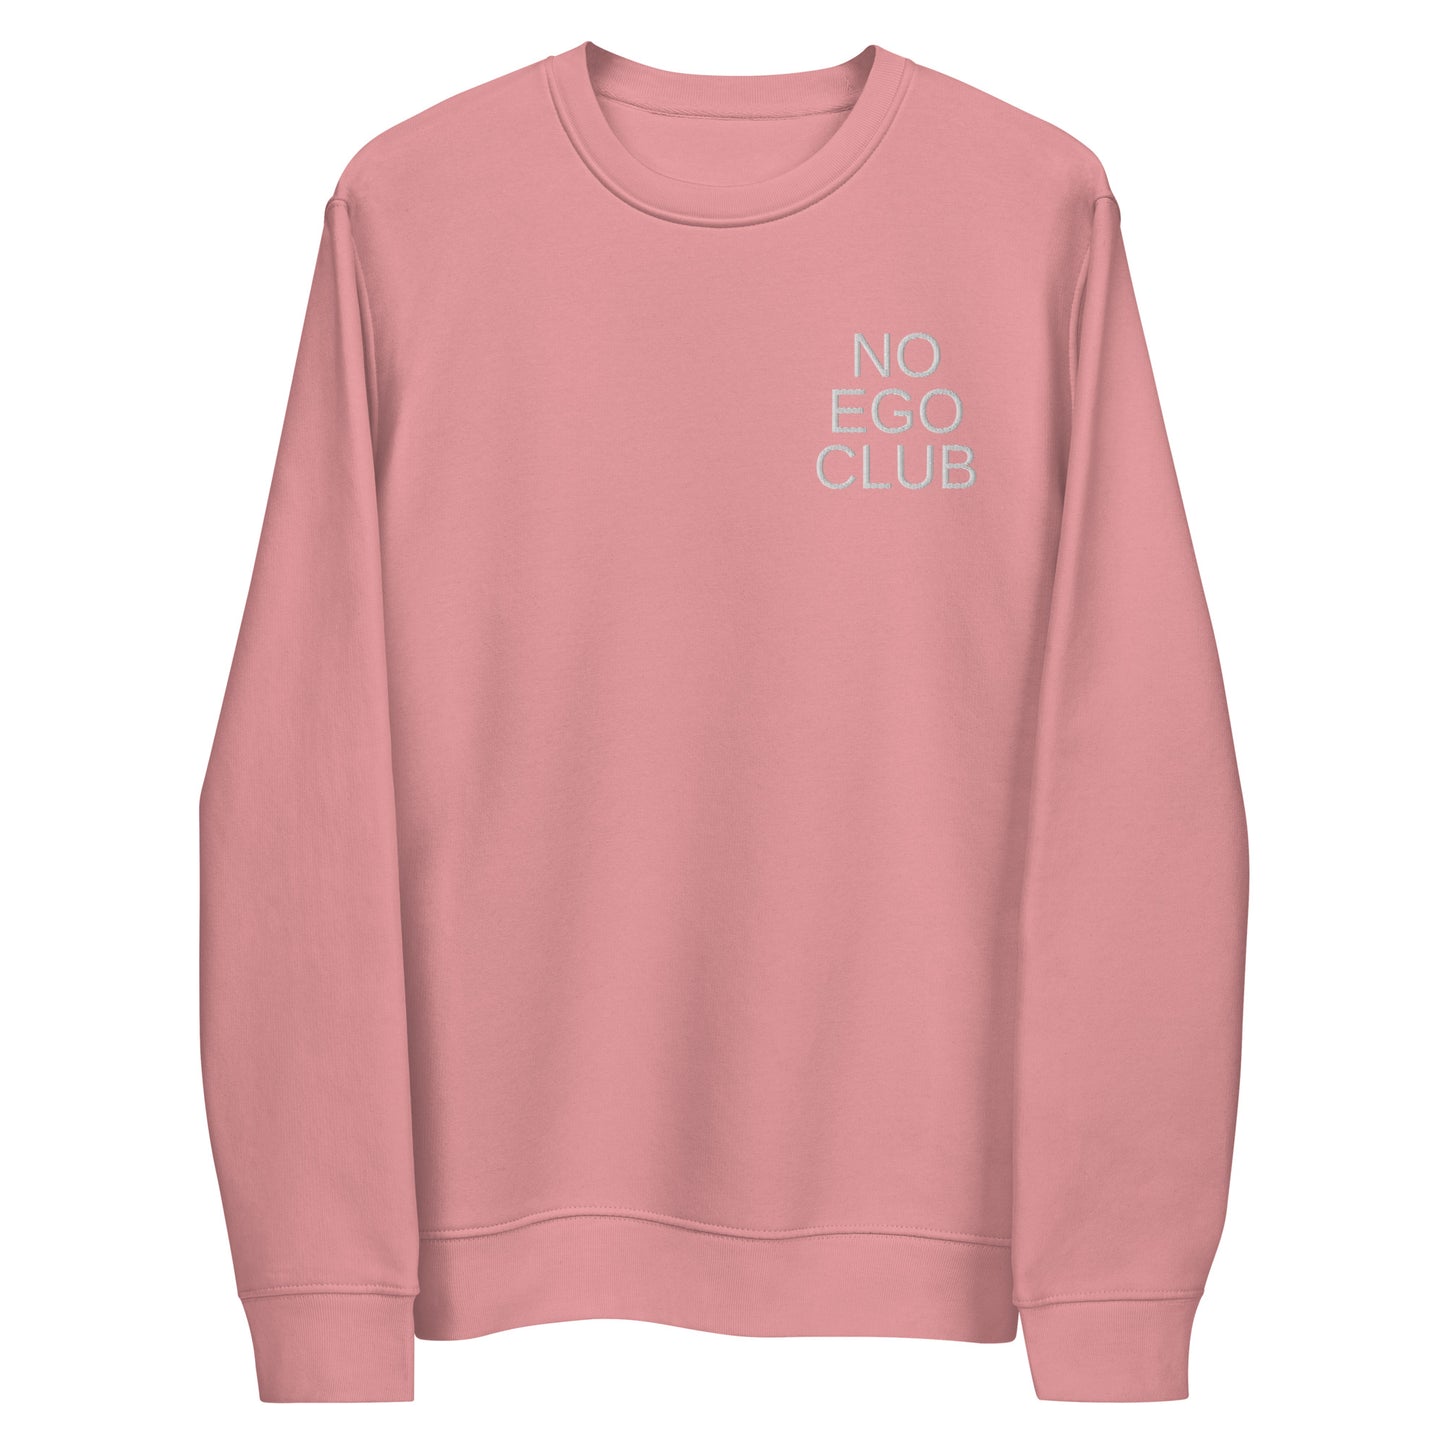 No Ego Club sweatshirt canyon pink unisex. Clothes With Words apparel.